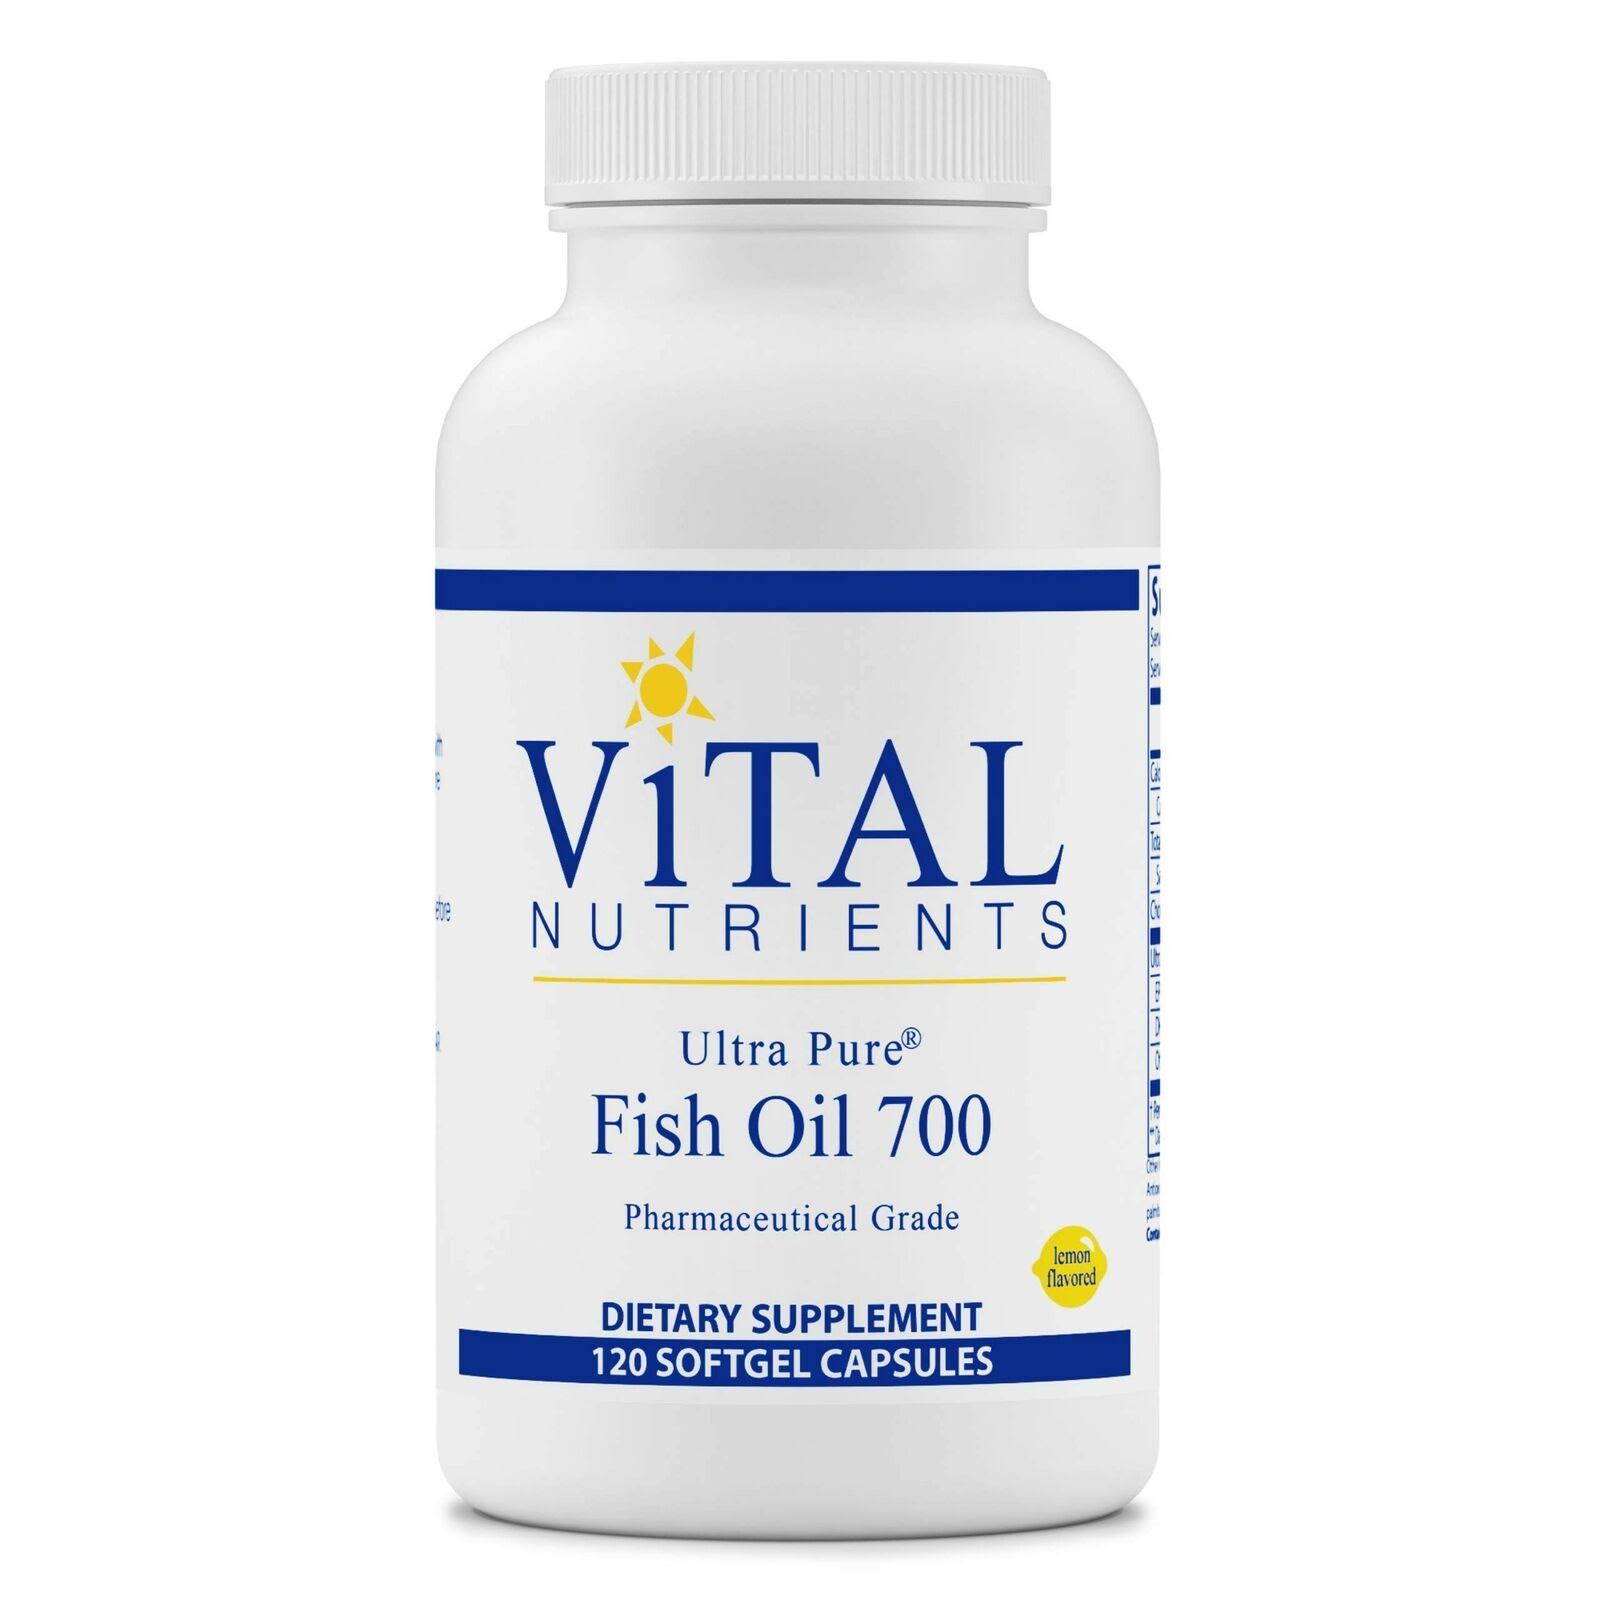 Vital Nutrients Ultra Pure Fish Oil Supplements - 120ct